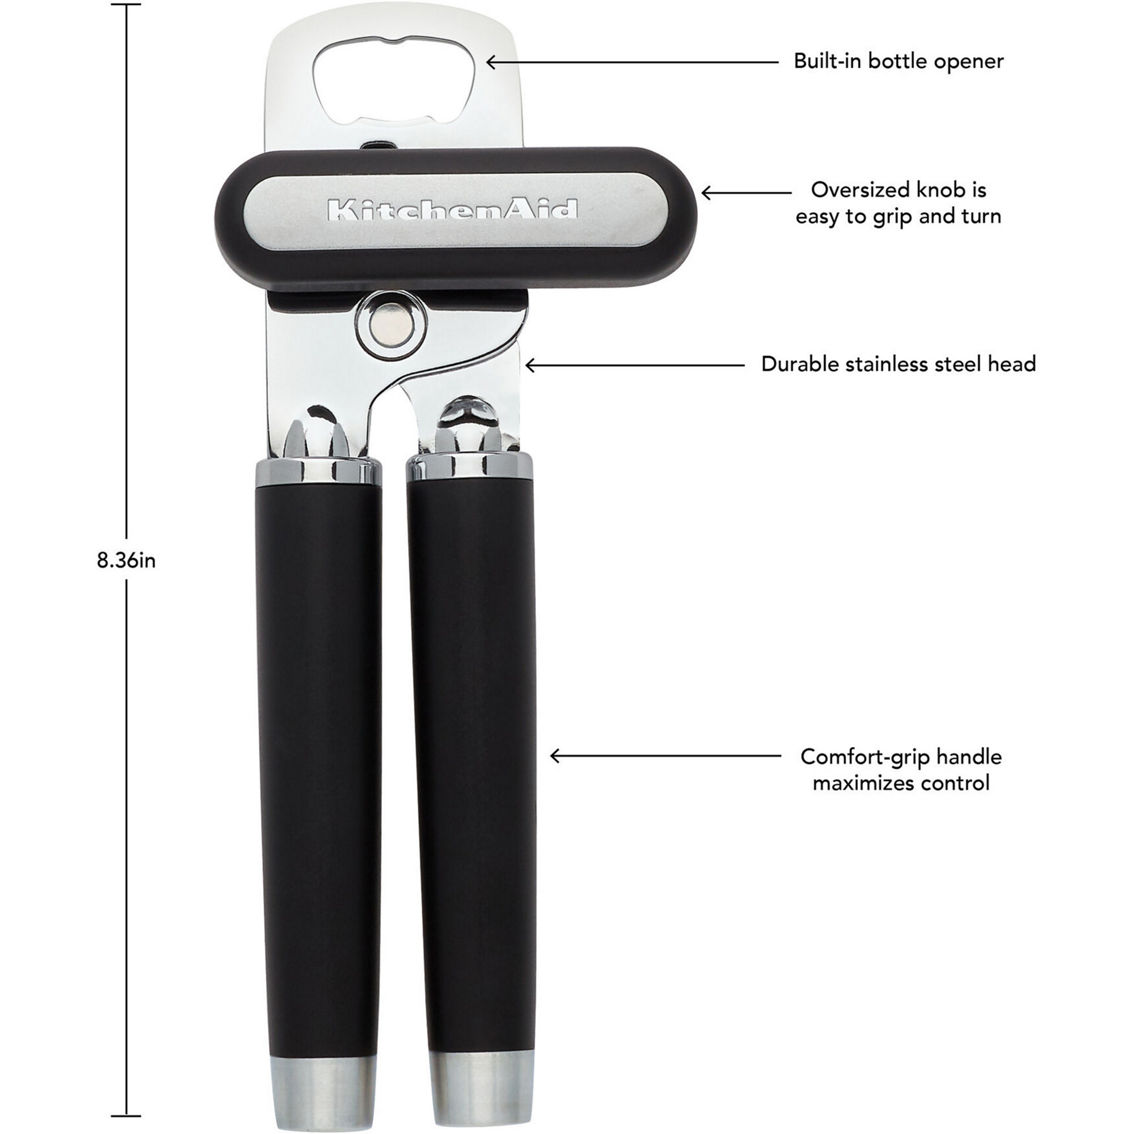 KitchenAid Gourmet Multi Function Can Opener with Bottle Opener - Image 4 of 6